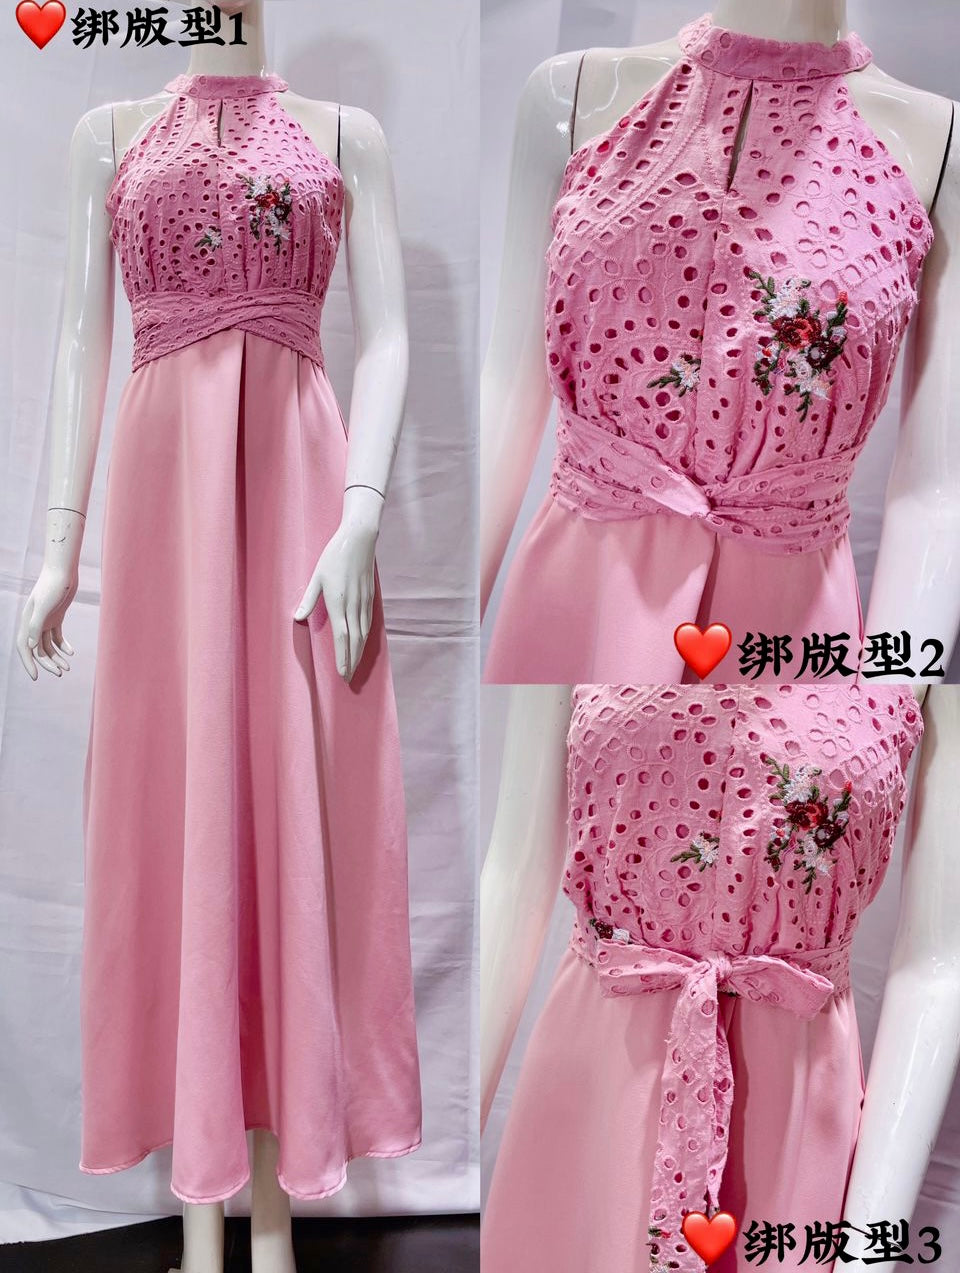 Eyelet embroidery halter maxi dress PINK (S)